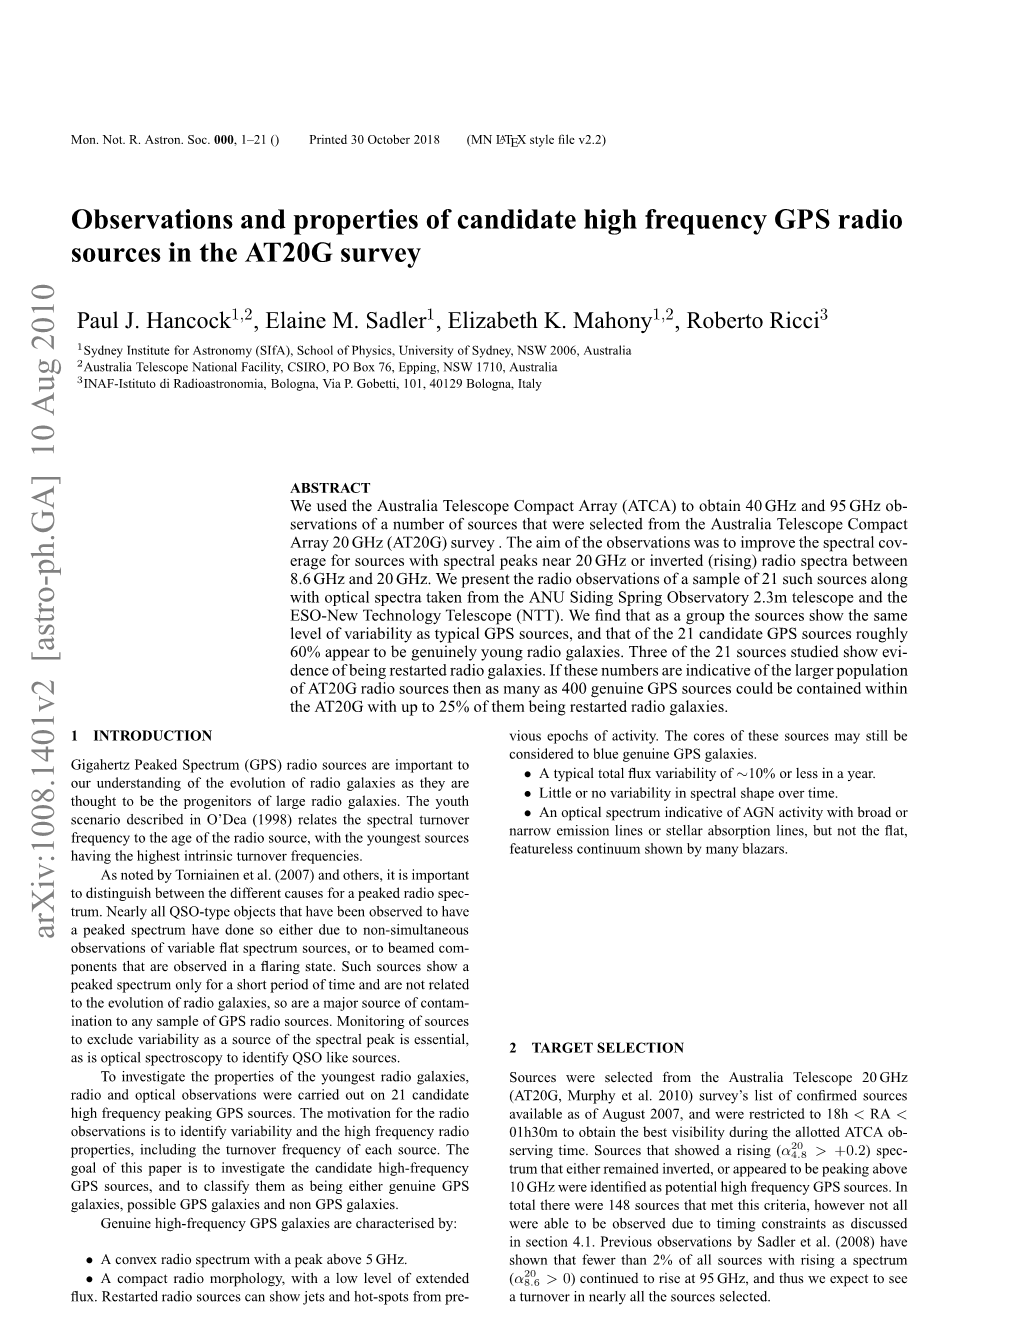 Observations and Properties of Candidate High Frequency GPS